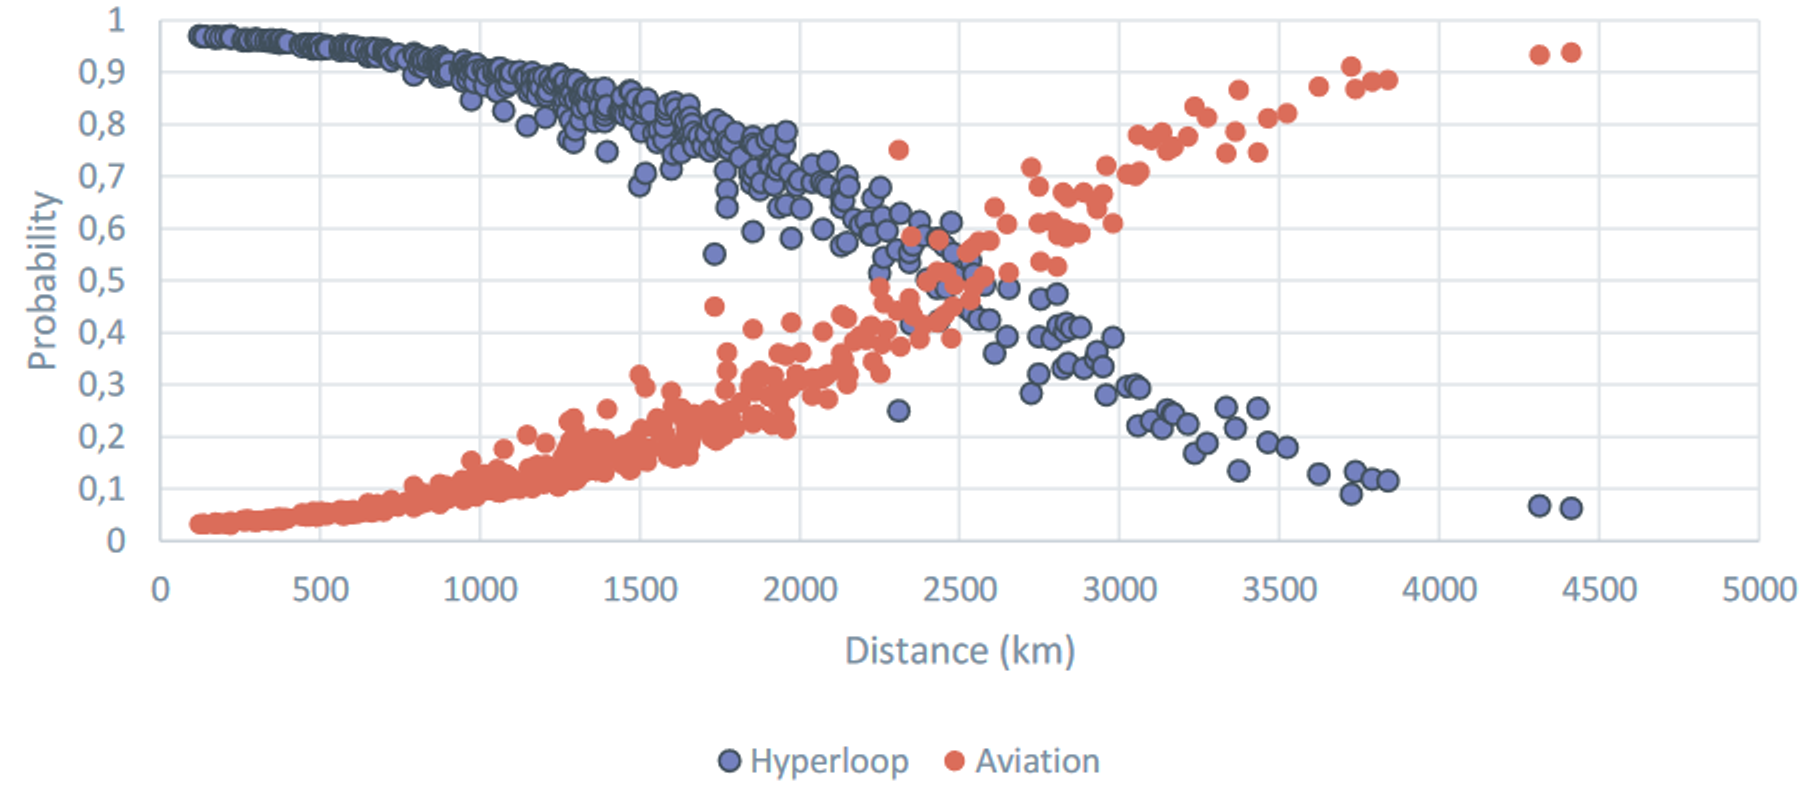 Probability to choose hyperloop or aviation for various European O-D pairs.